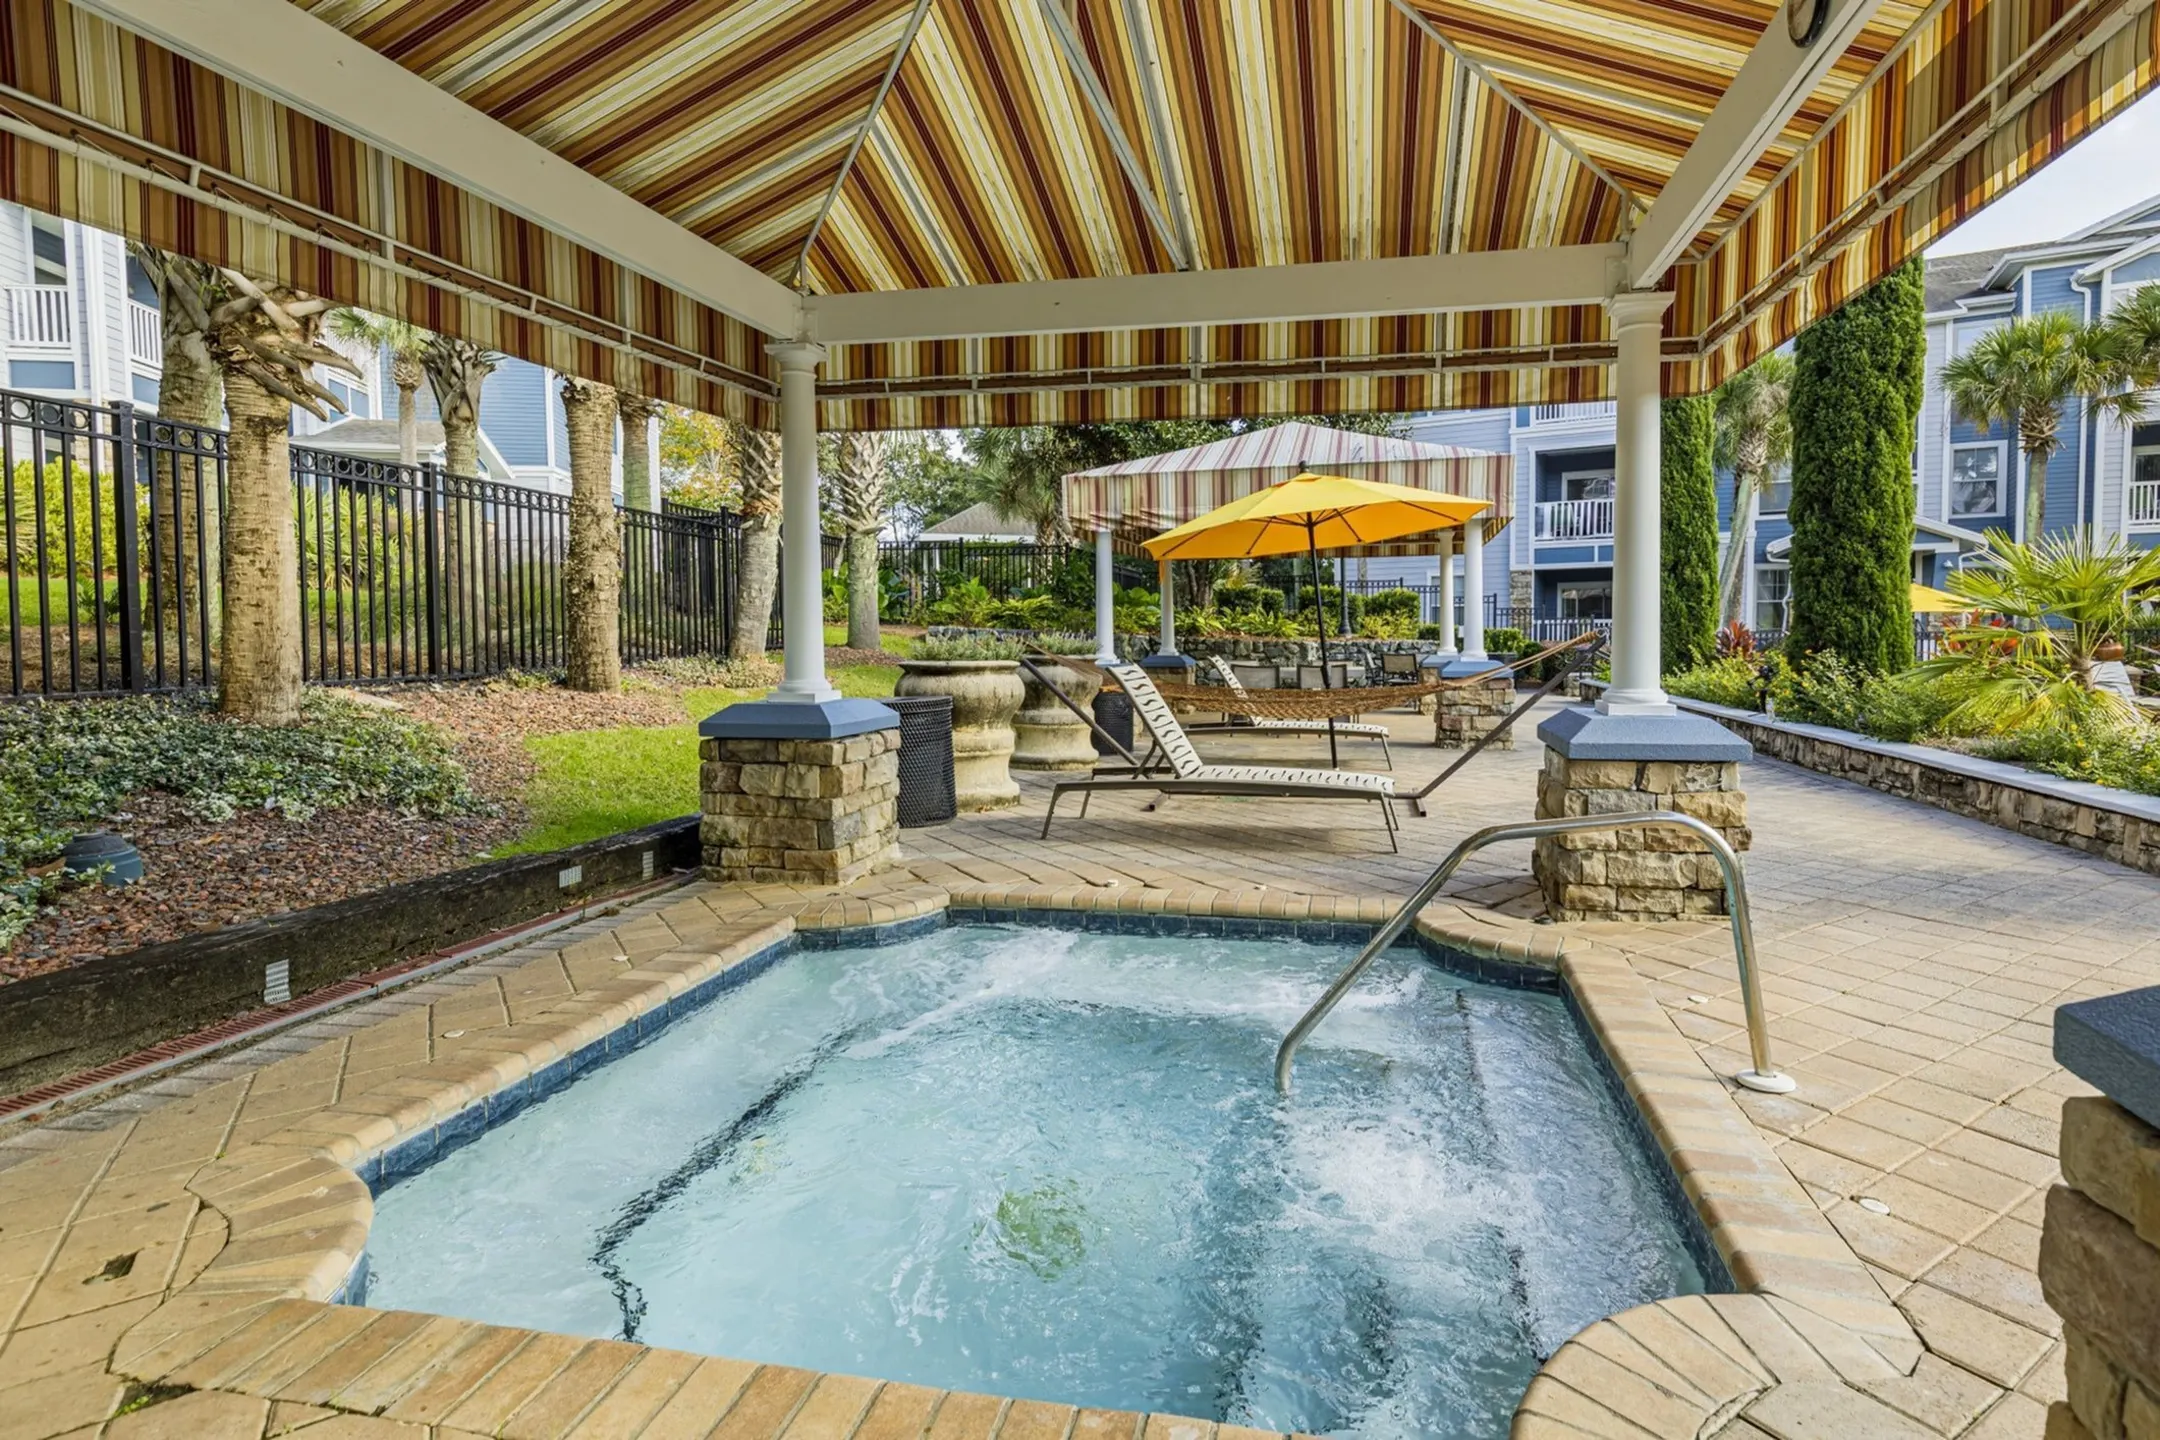 Pool - West 10 Apartments - Per Bed Lease - Tallahassee, FL